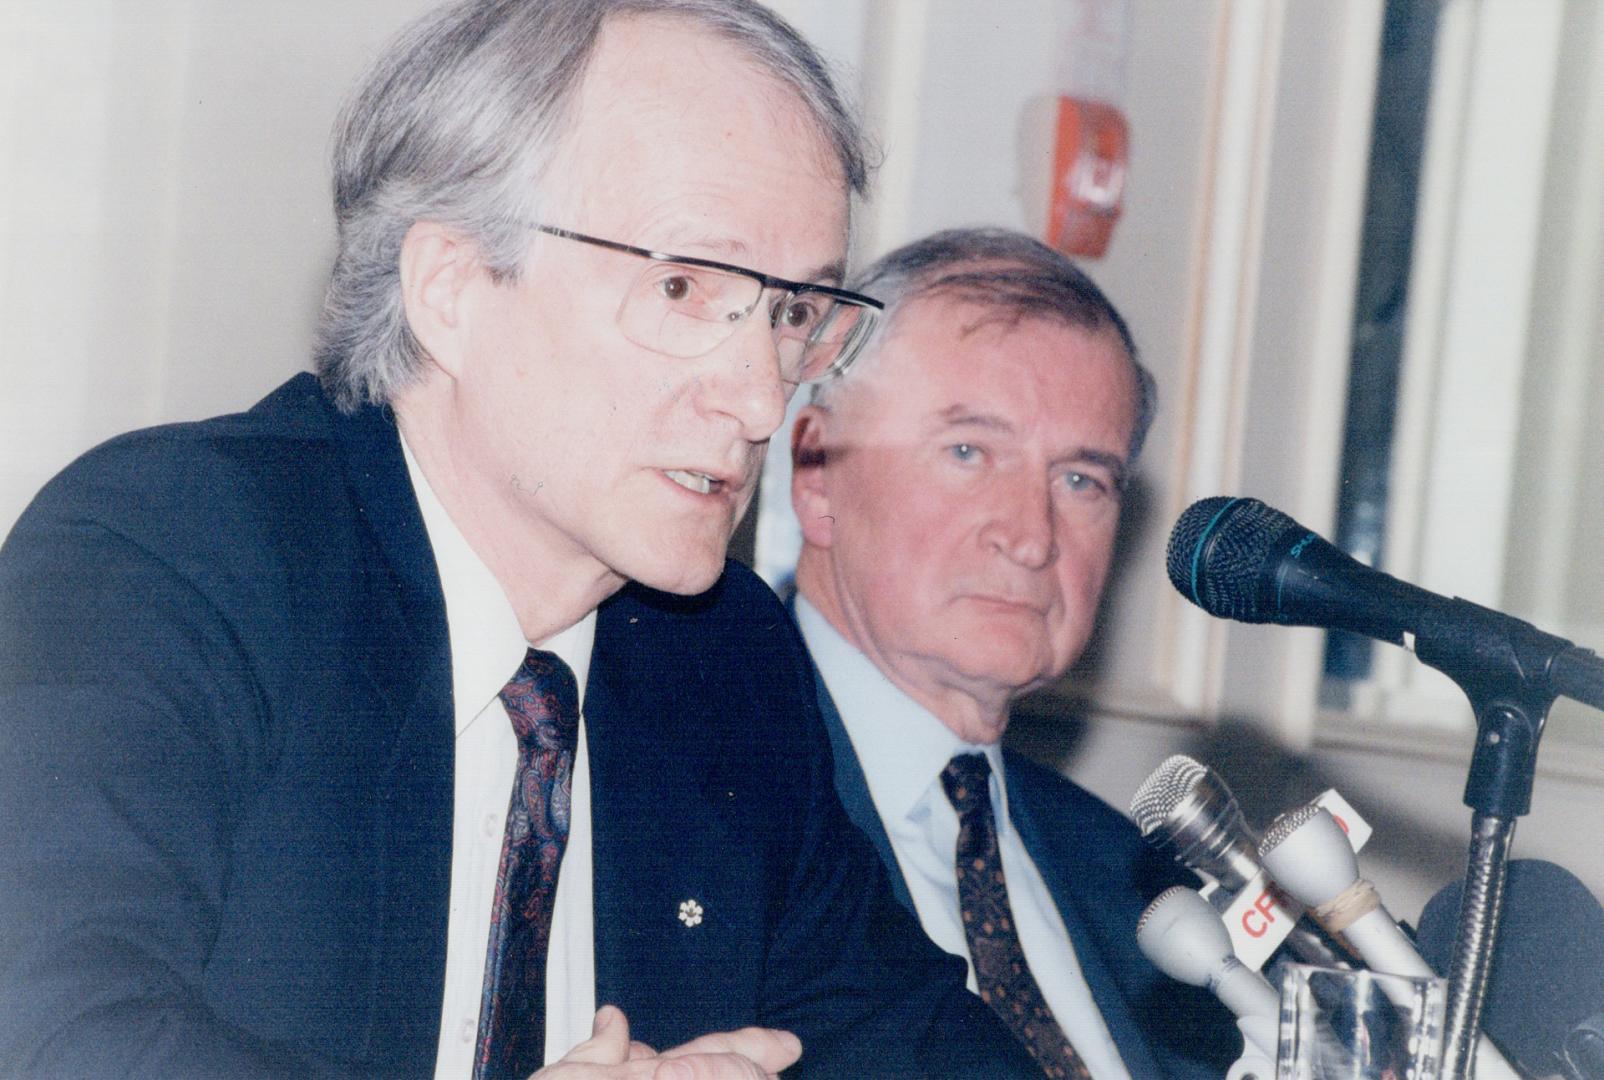 Patrick O'Callaghan (Right) and W